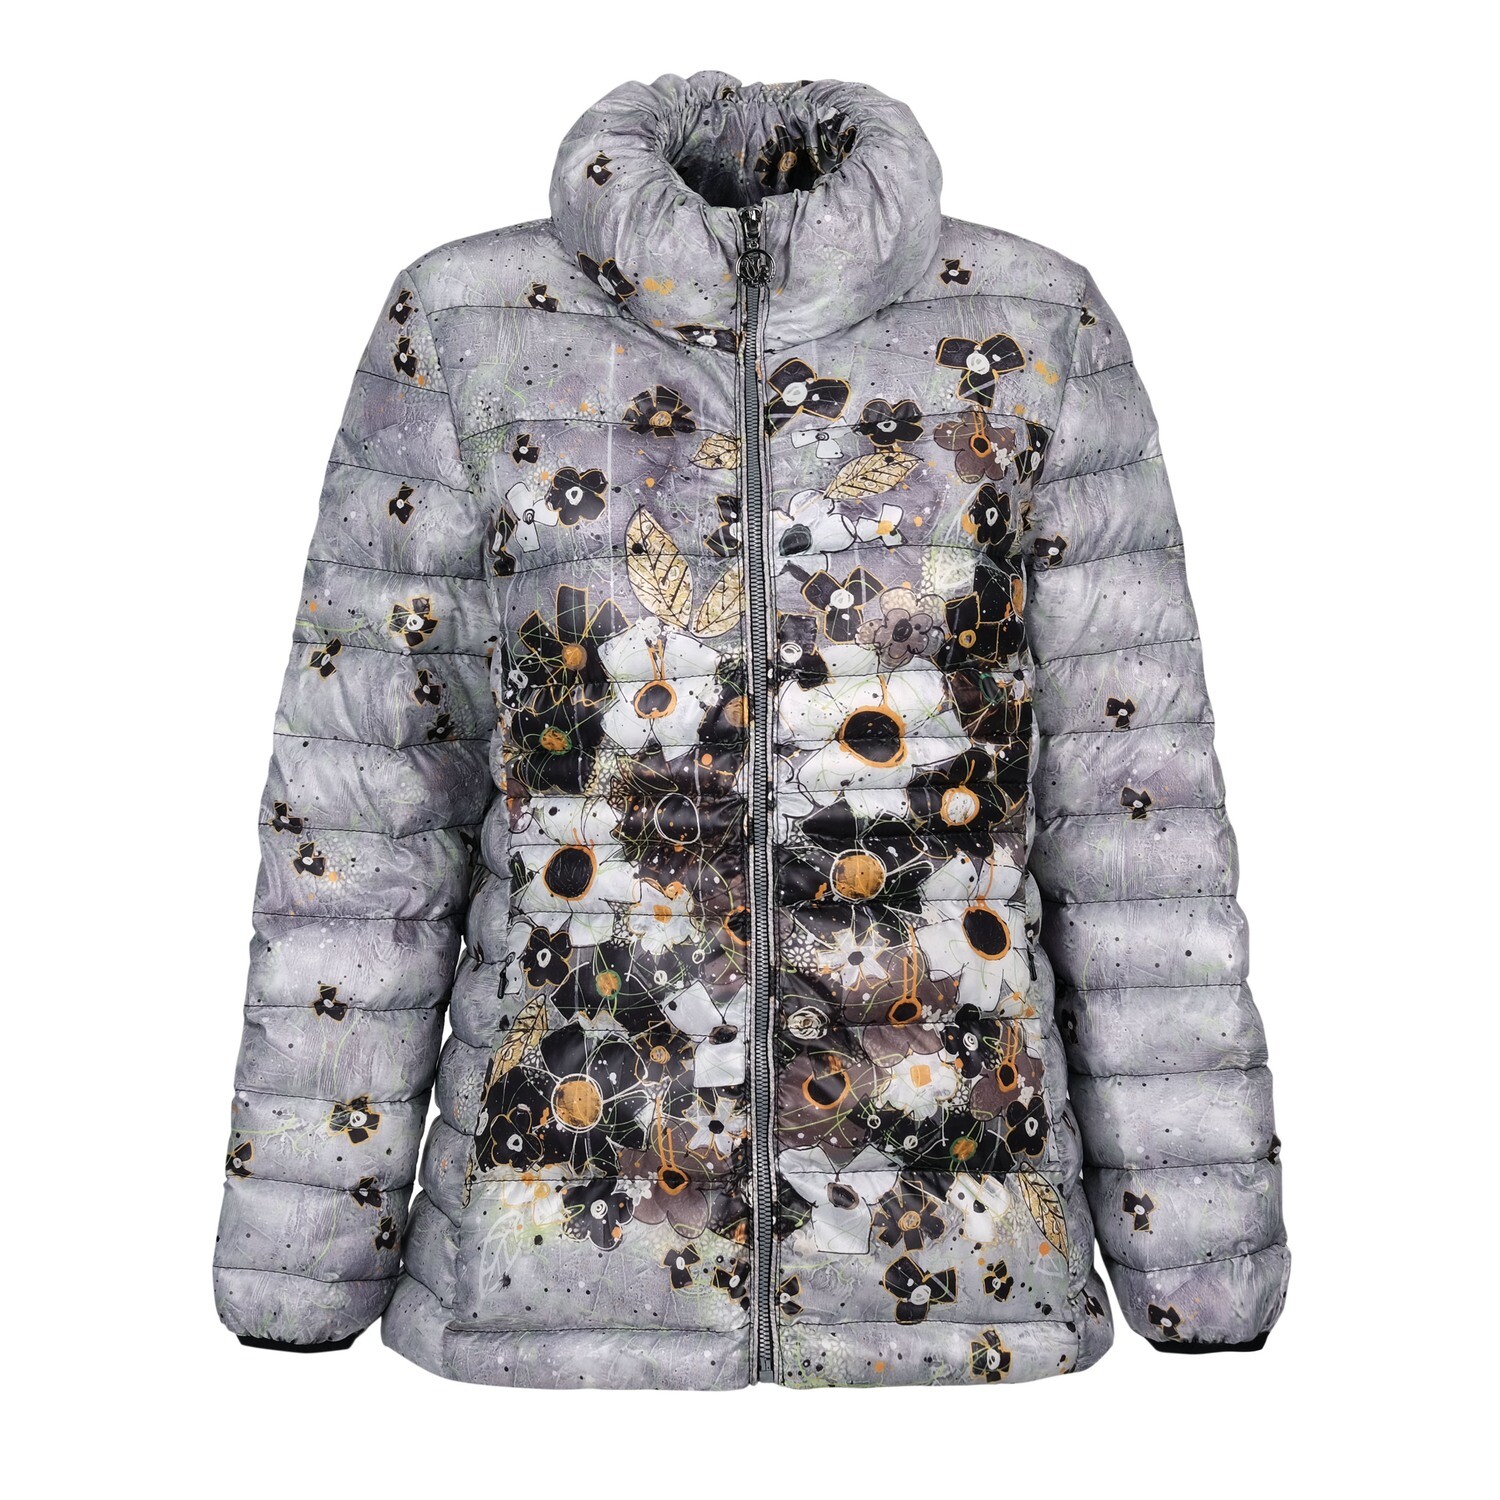 Simply Art Dolcezza: I Am Taking You Home Tonight Abstract Art Puffer Short Coat SOLD OUT